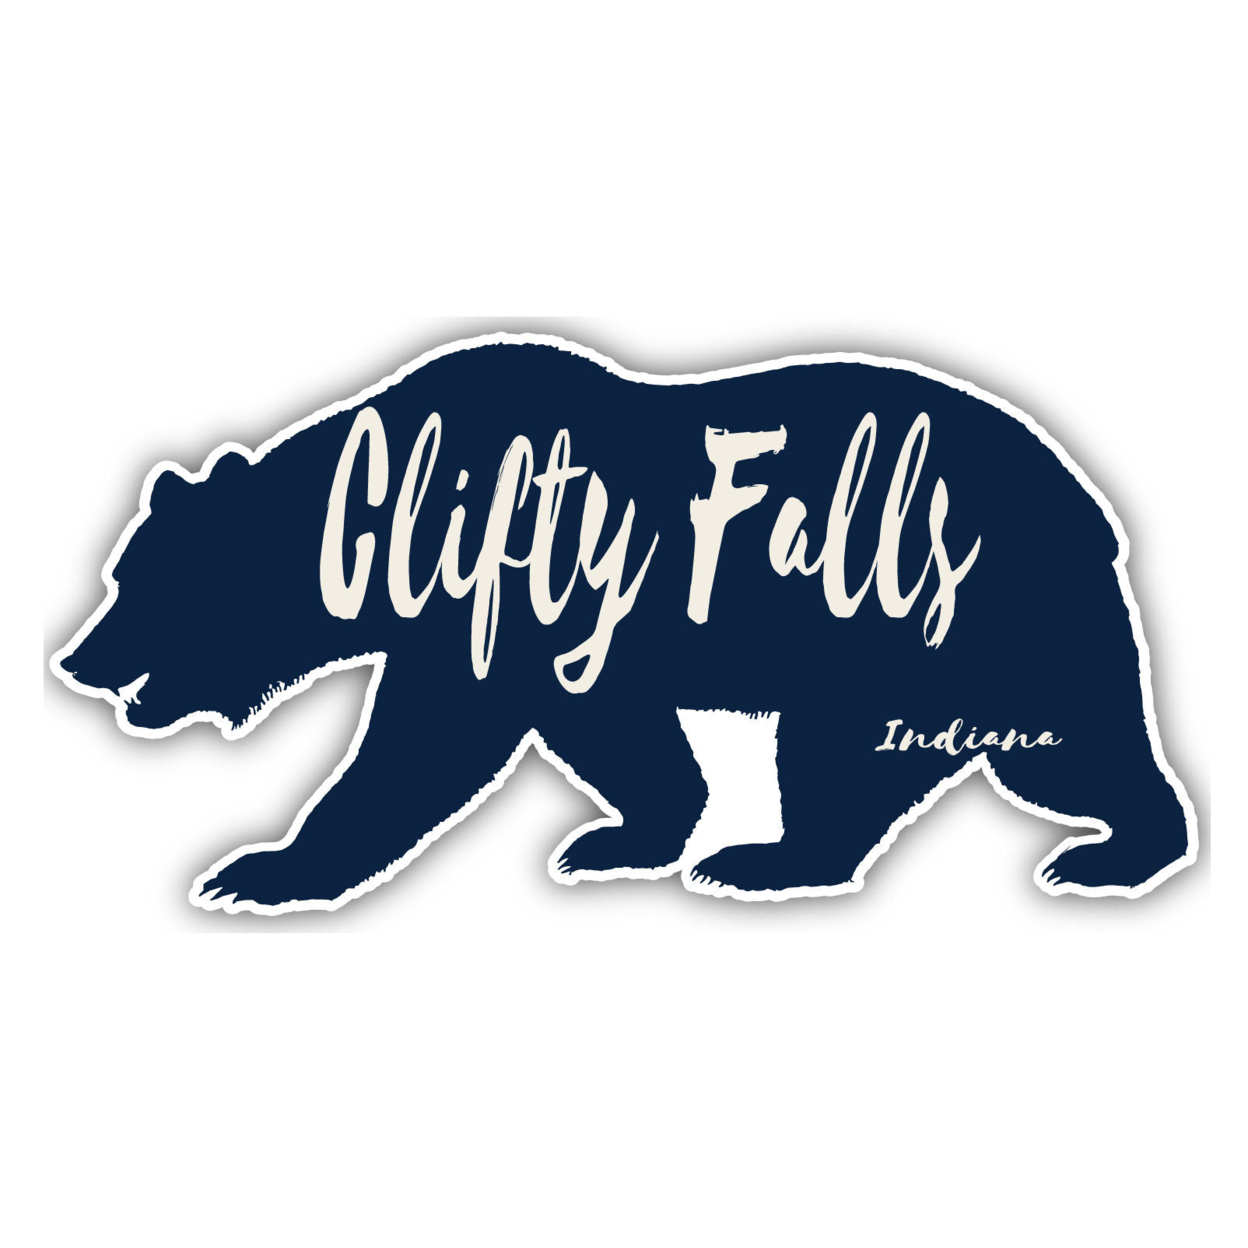 Clifty Falls Indiana Souvenir Decorative Stickers (Choose Theme And Size) - Single Unit, 8-Inch, Bear